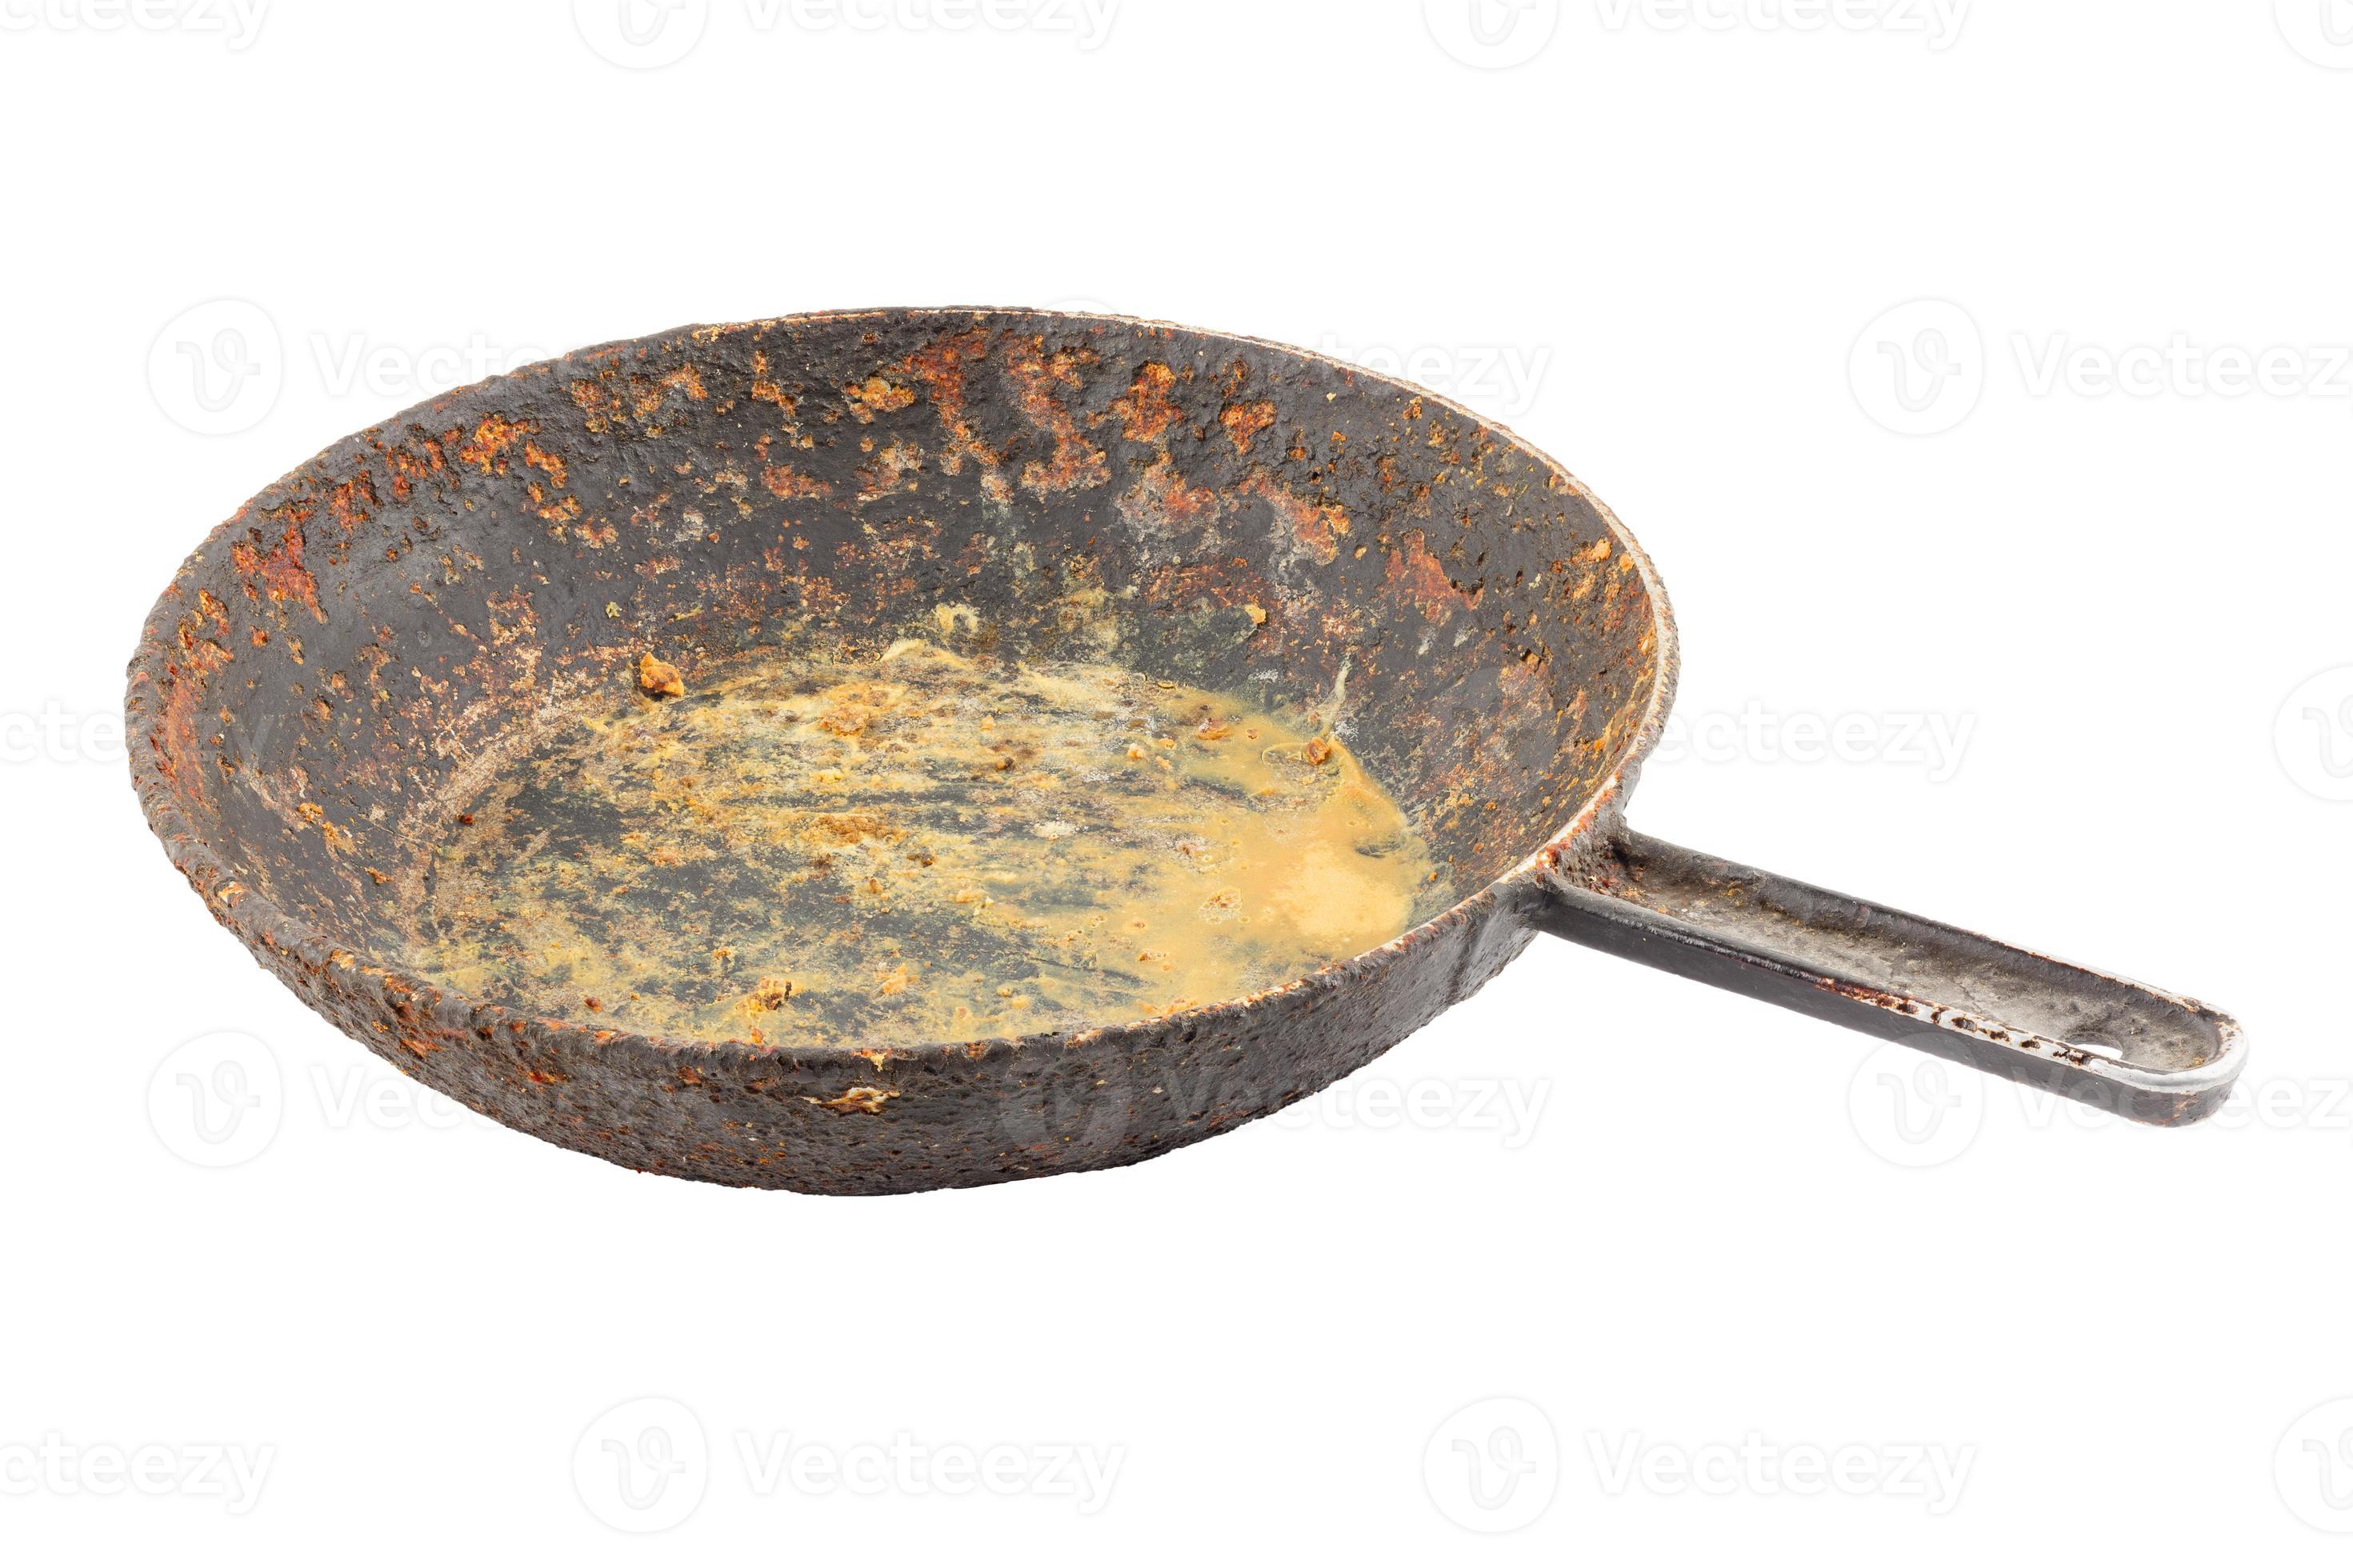 https://static.vecteezy.com/system/resources/previews/012/634/851/large_2x/old-disgusting-stained-rusty-cast-iron-pan-with-burnt-fat-and-food-leftovers-isolated-photo.jpg